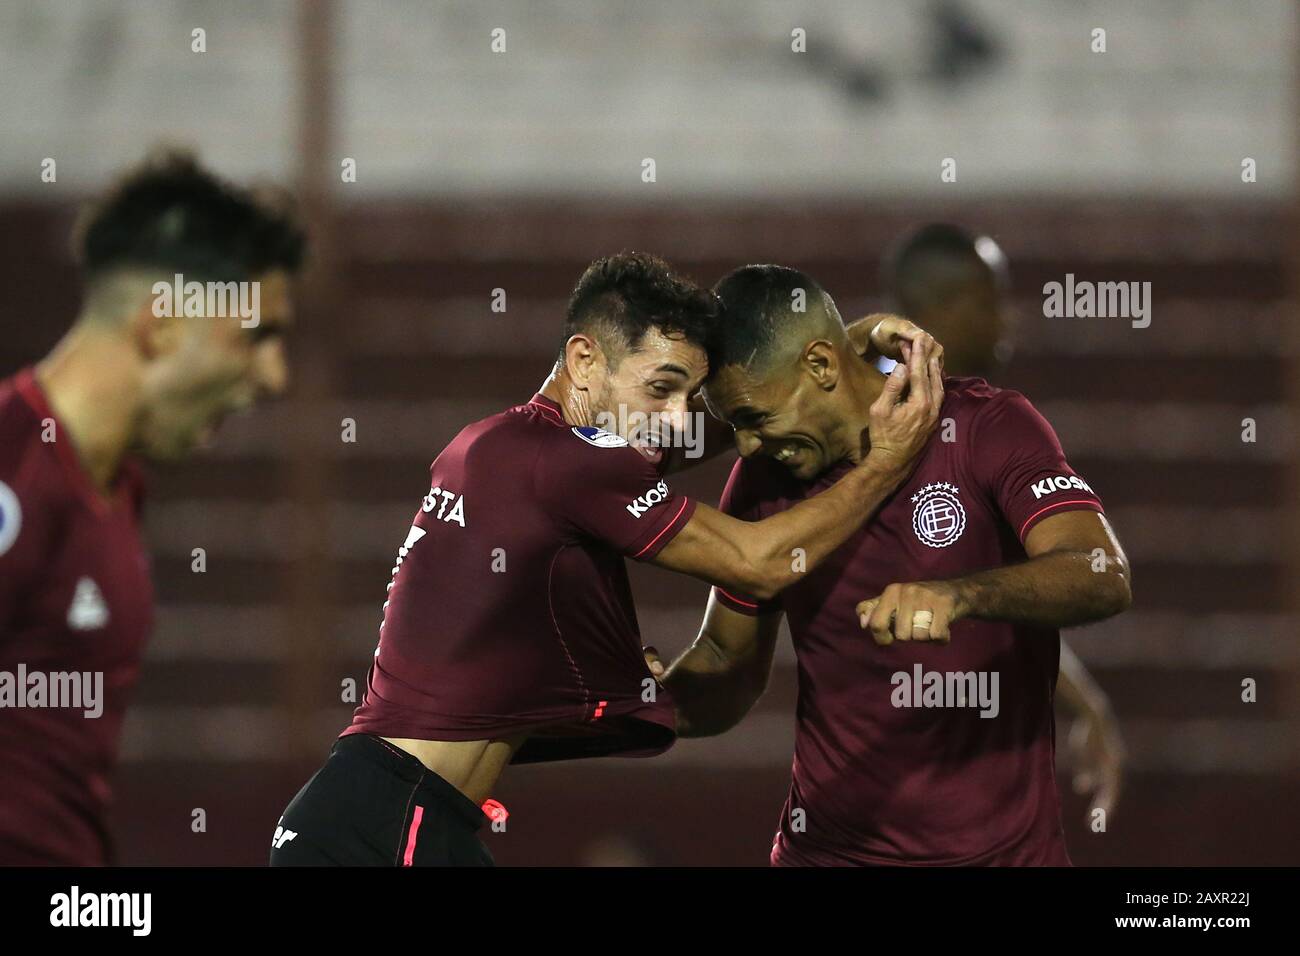 Buenos Aires, Argentina - February 12, 2020: Lautaro Acosta and Jose Sand celebrating the Goal against Universidad Catolica of Ecuador for the first f Stock Photo